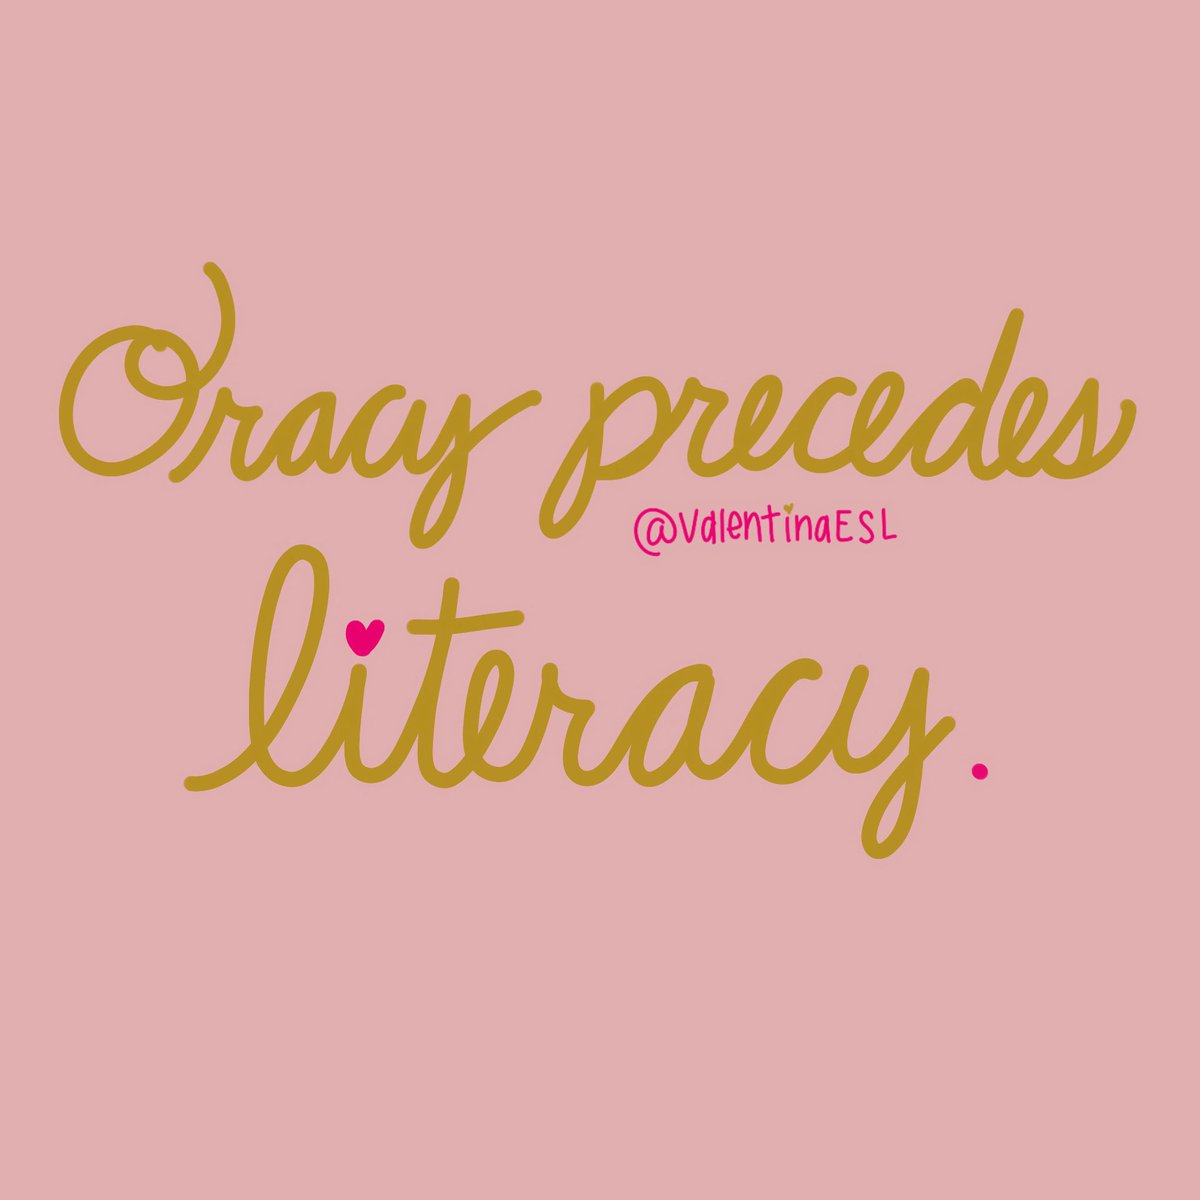 Oracy precedes literacy. This is especially important for emergent bilingual students or bilingual/multilingual learners. How do you ensure that oracy is paramount in daily practices?